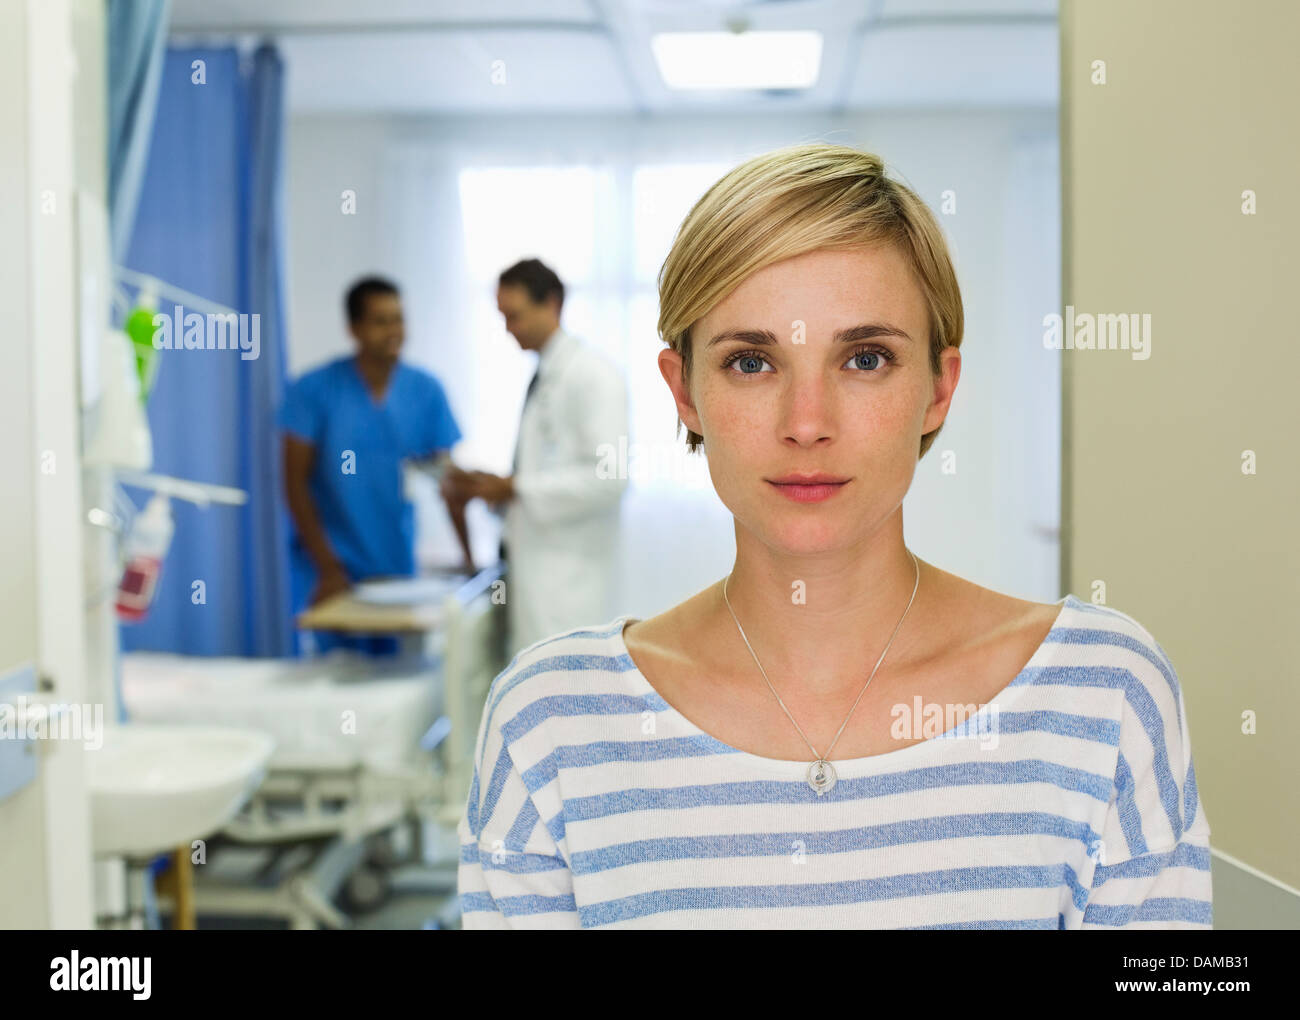 Patient standing in hospital room Banque D'Images